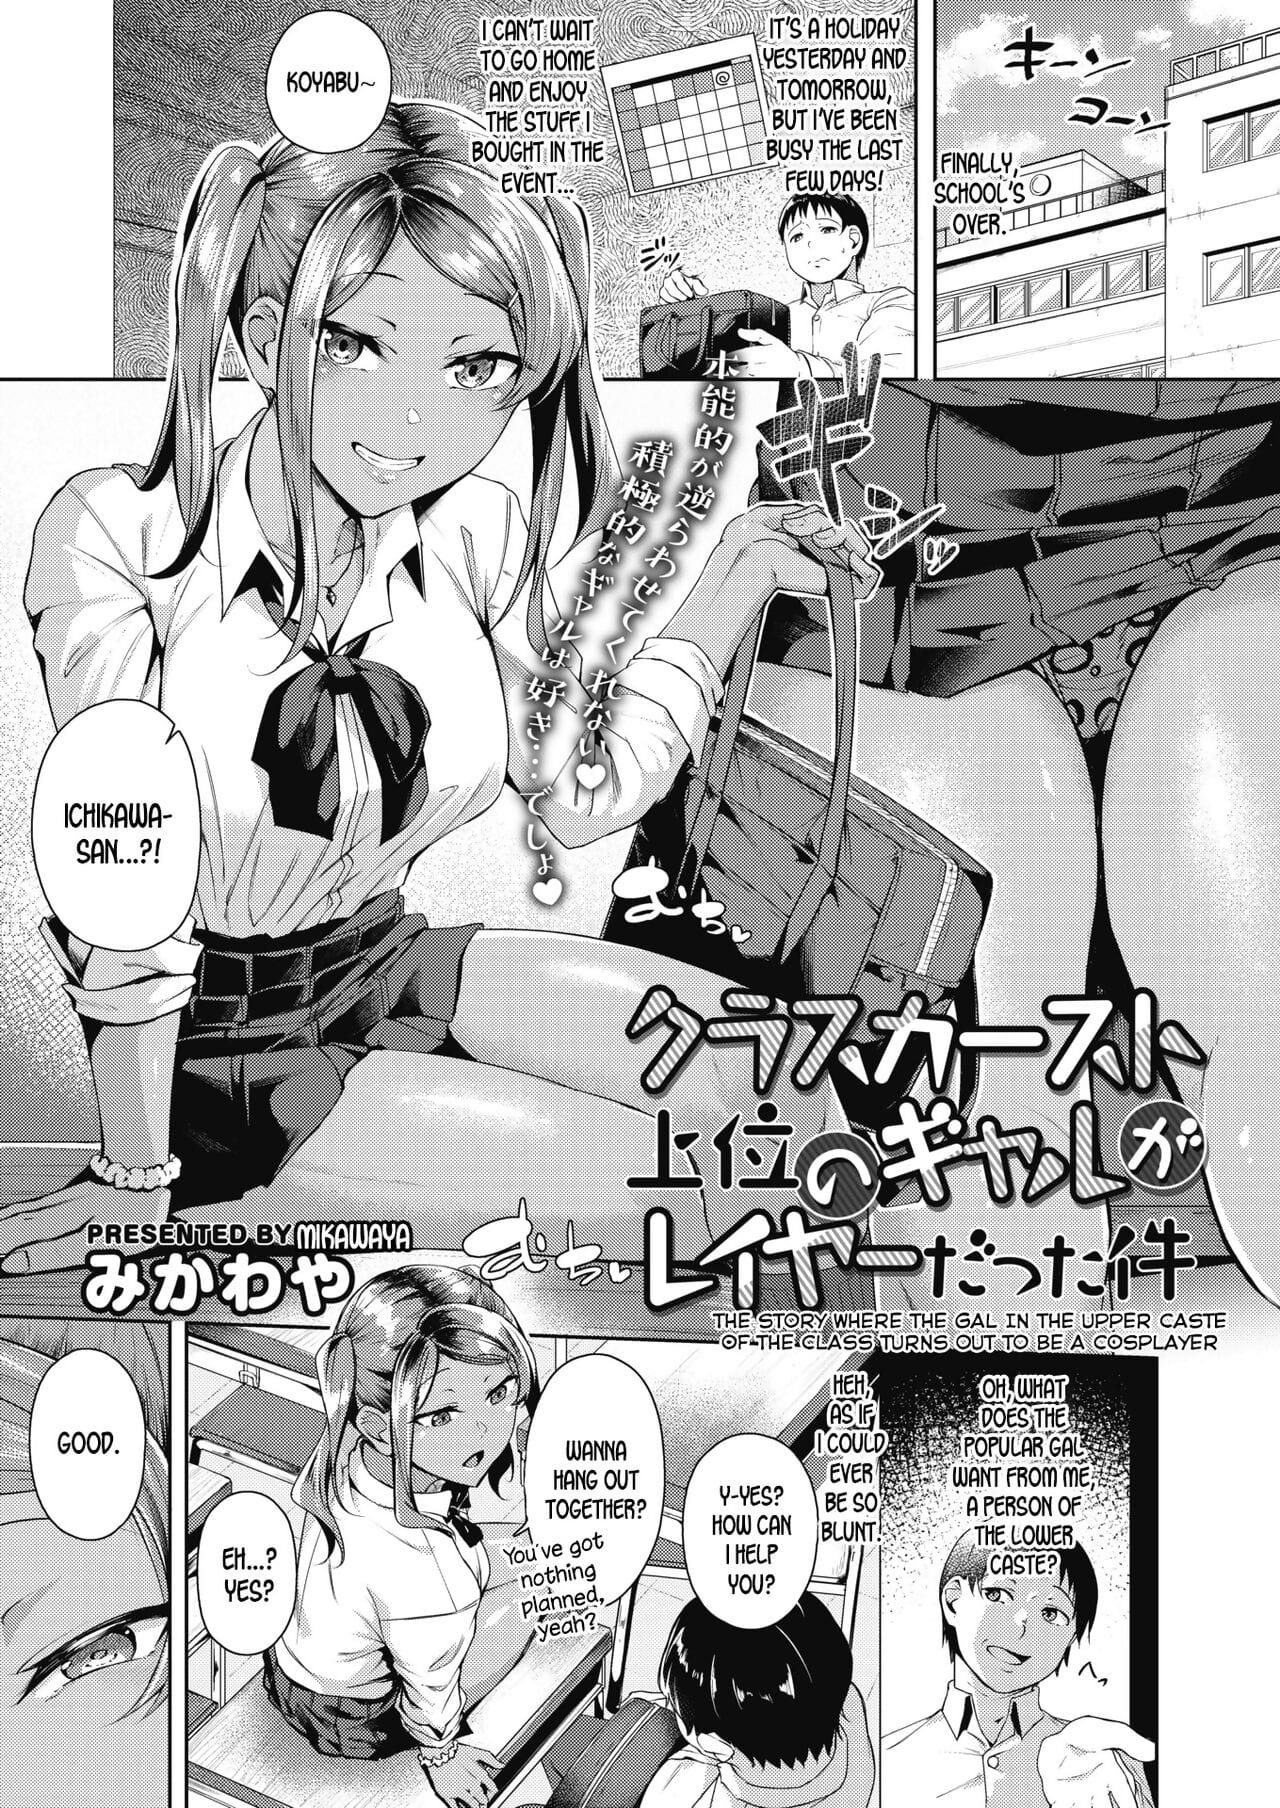 Class Caste Joui no Gal ga Layer Datta Ken - The Story Where the Gal in the Upper Caste of the Class Turns Out To Be a Cosplayer page 1